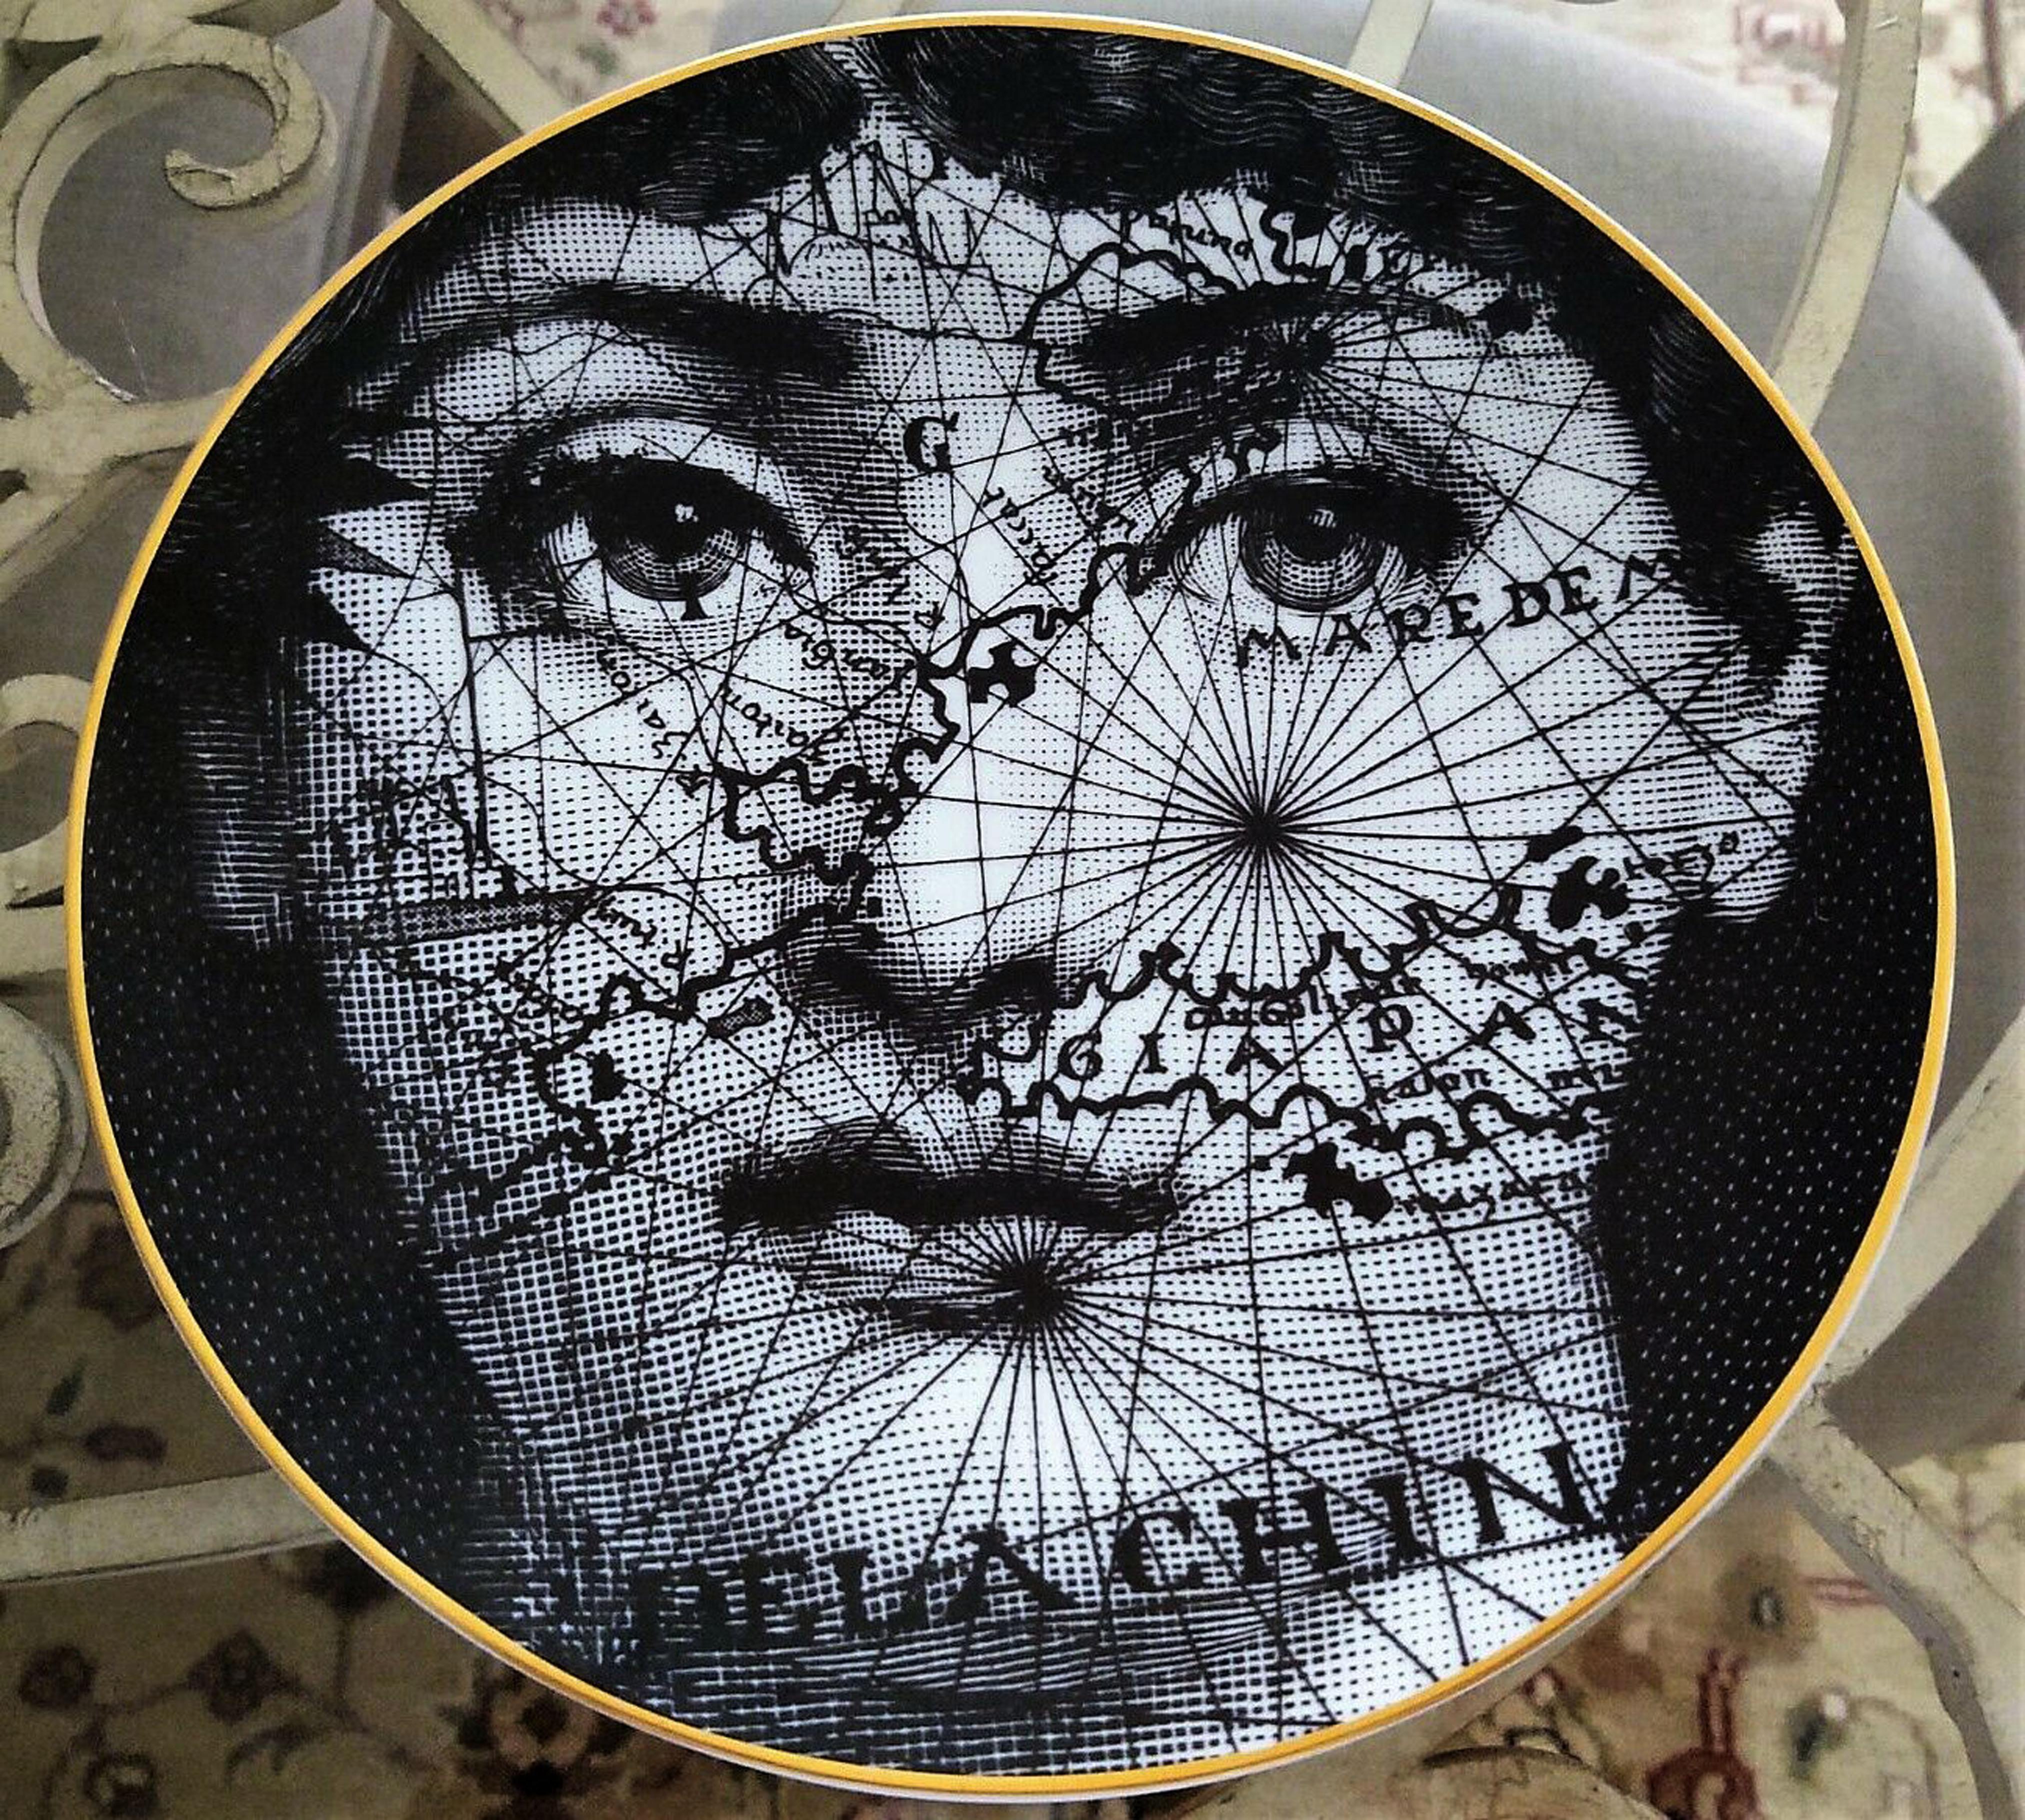 Piero Fornasetti Rosenthal Temi E Variazioni (Themes & Variations) porcelain plate,
 Motiv 31- Map.
1980s.
(Ref: NY9635-cnp)

The Fornasetti porcelain plate from the Themes & Variation series depicts the face of Lina Cavalieri overlaid with an